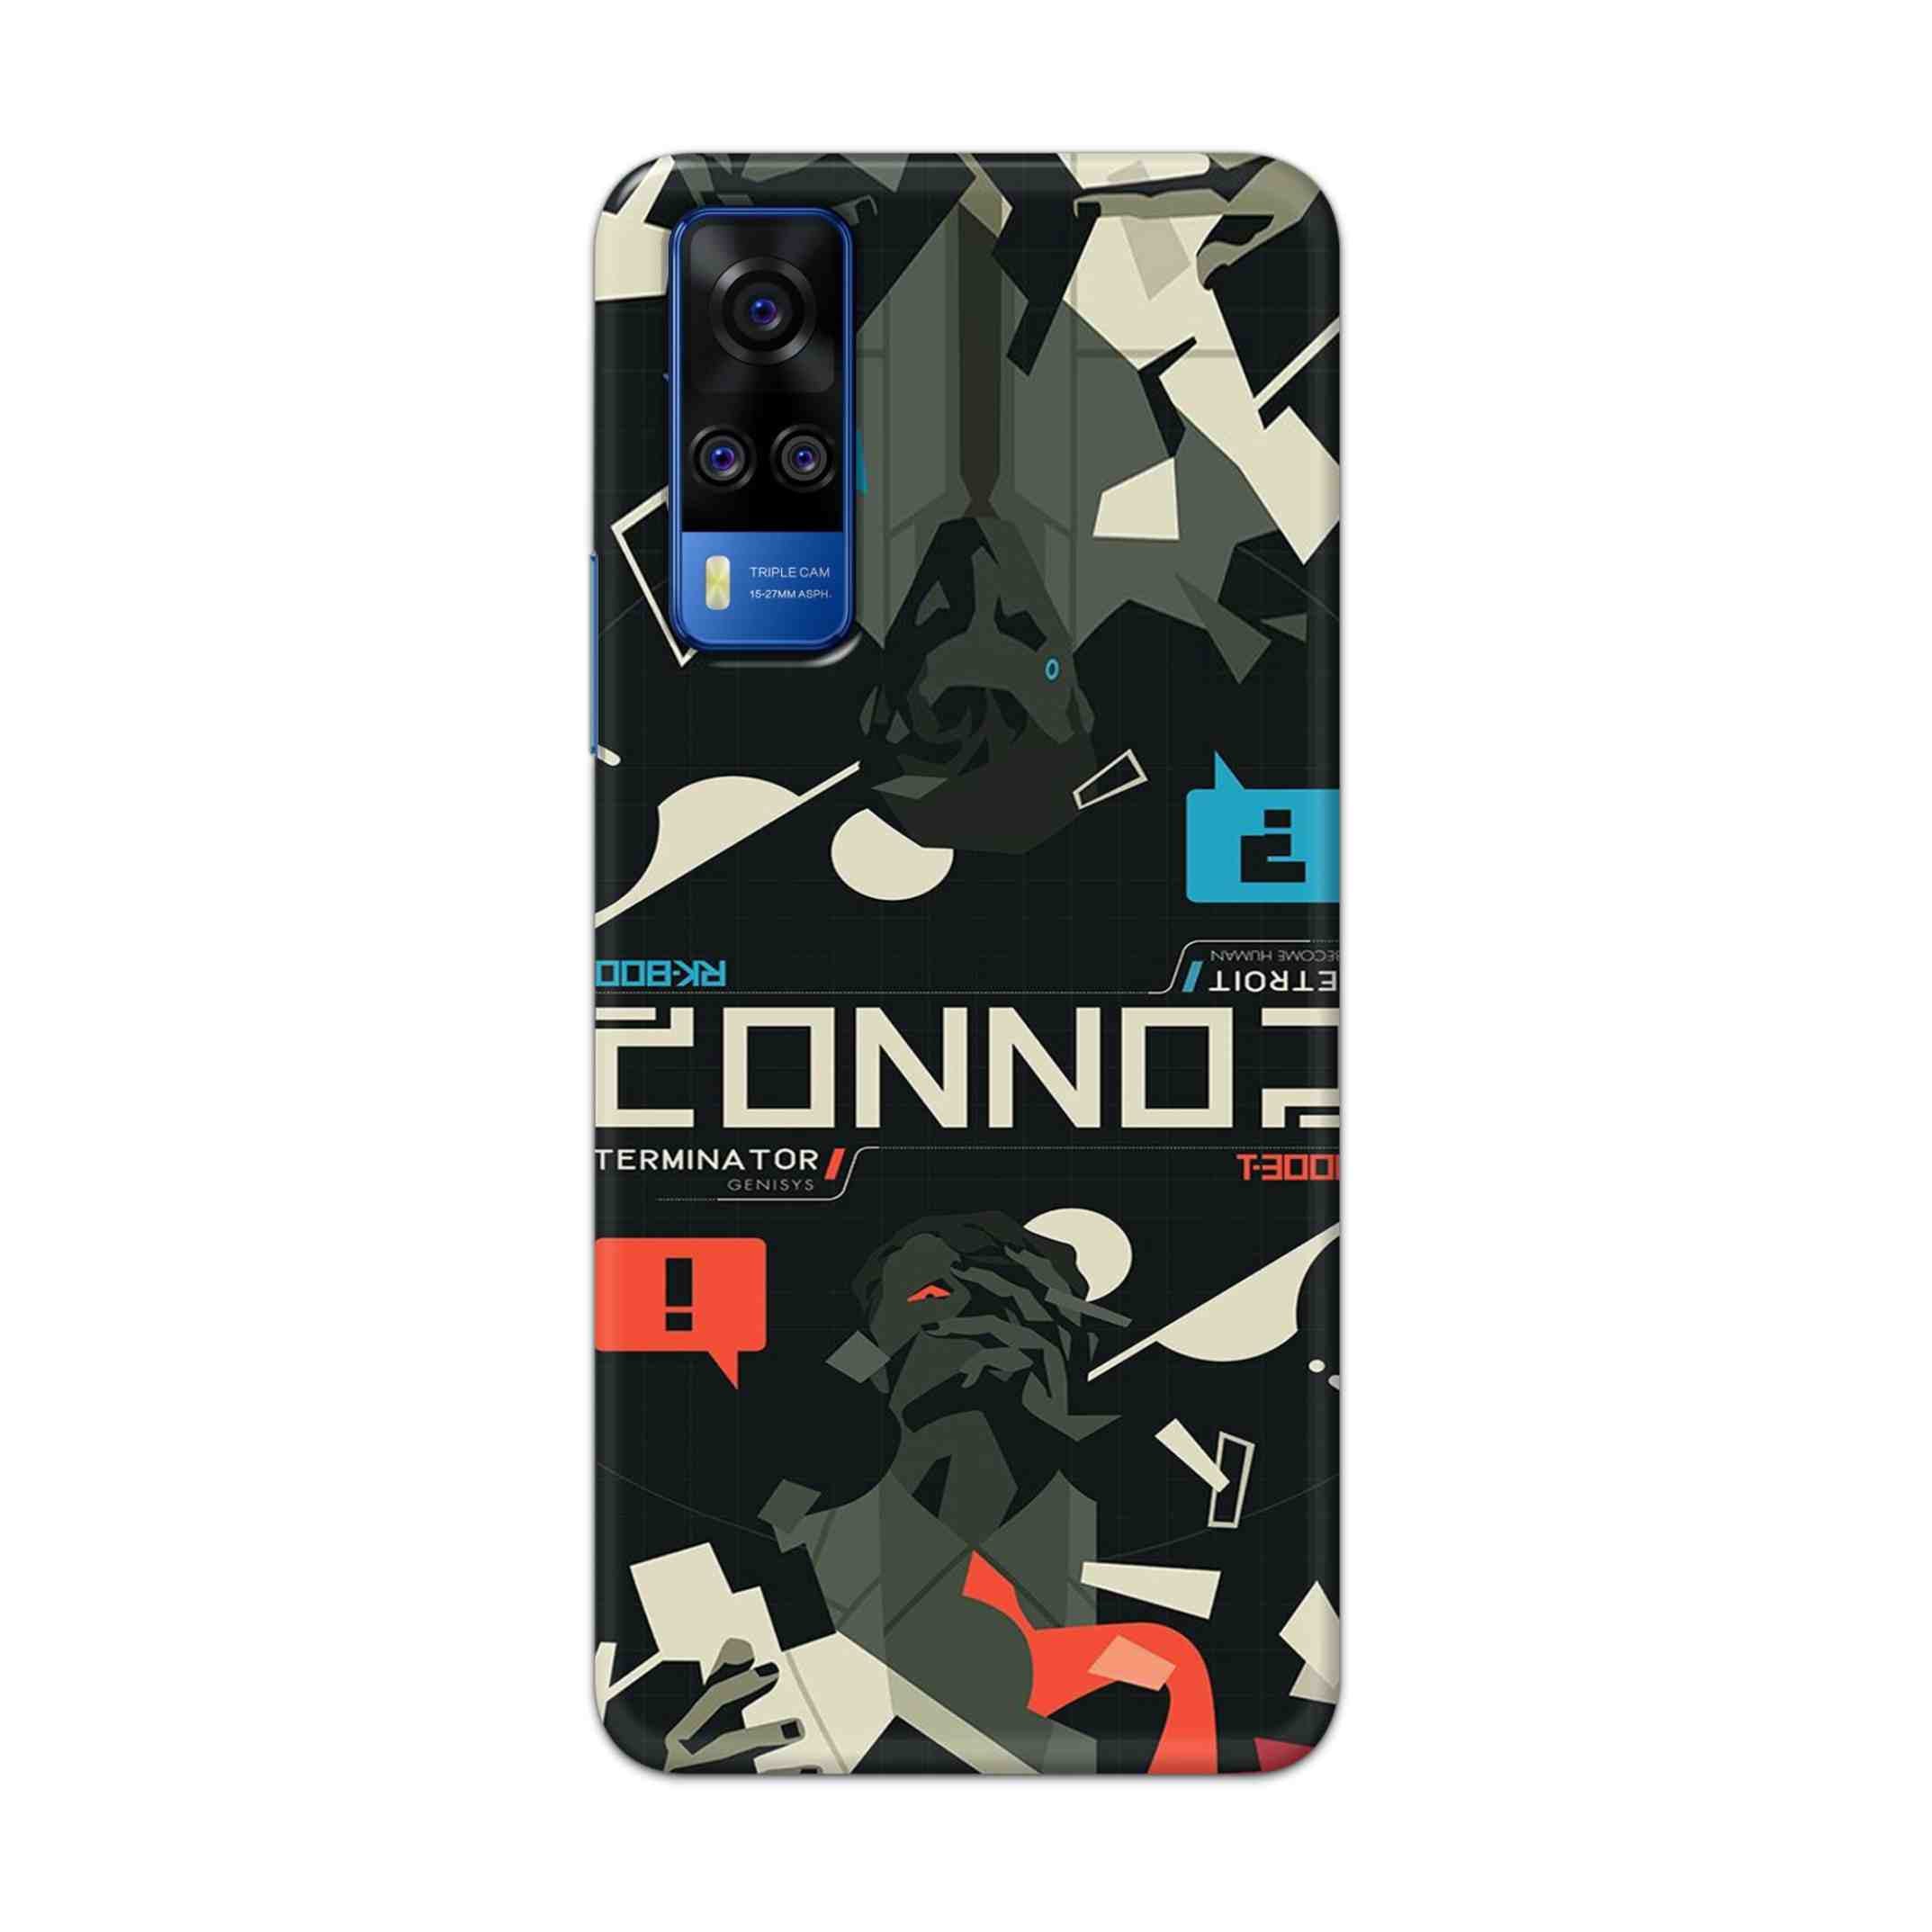 Buy Terminator Hard Back Mobile Phone Case Cover For Vivo Y51a Online